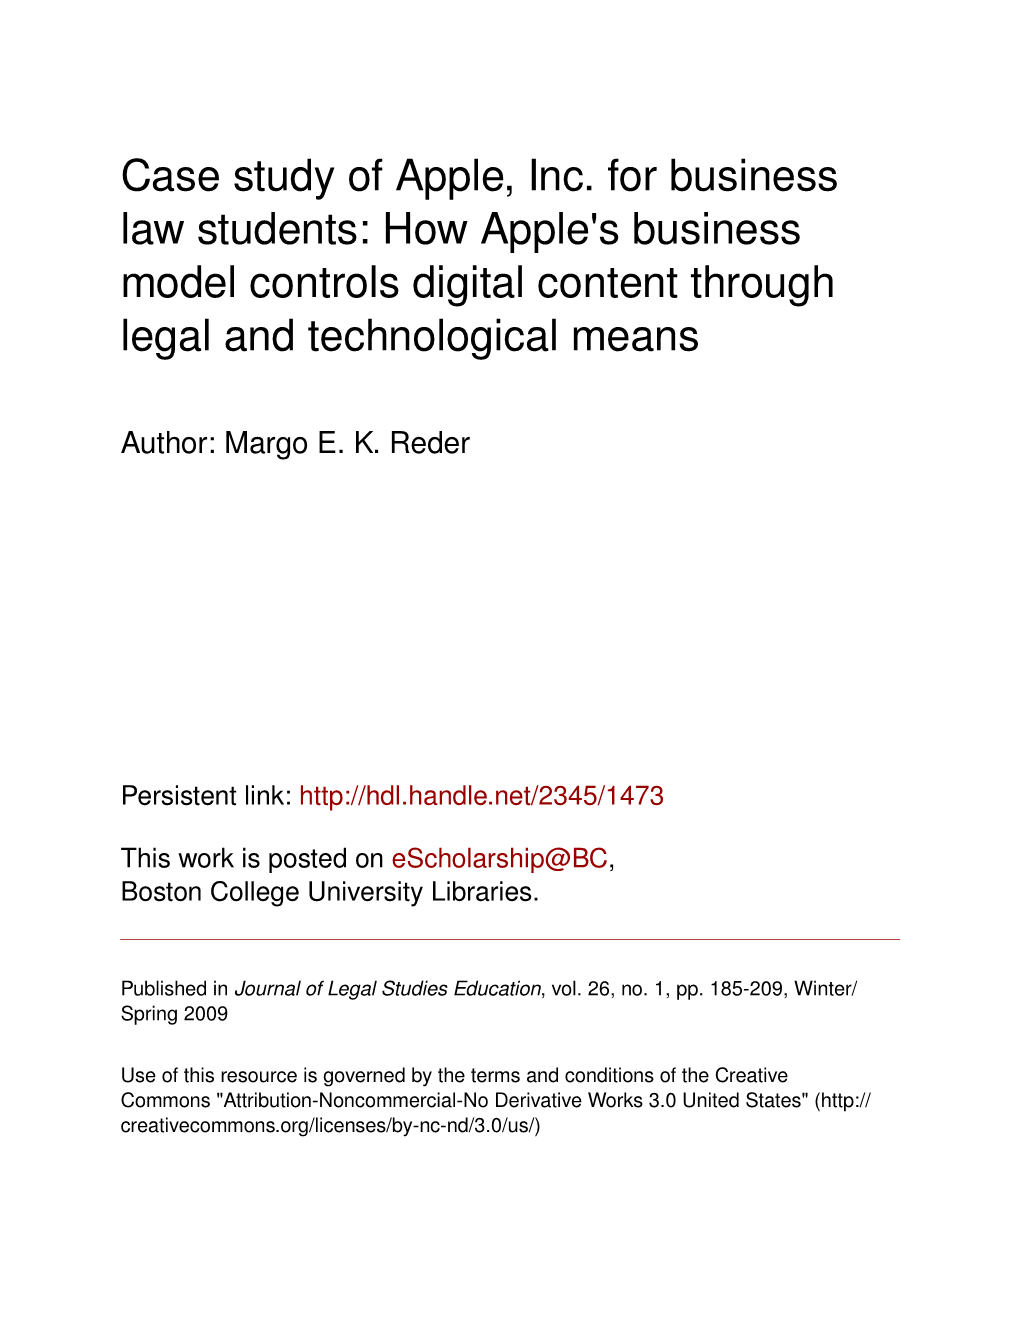 Case Study of Apple, Inc. for Business Law Students: How Apple's Business Model Controls Digital Content Through Legal and Technological Means